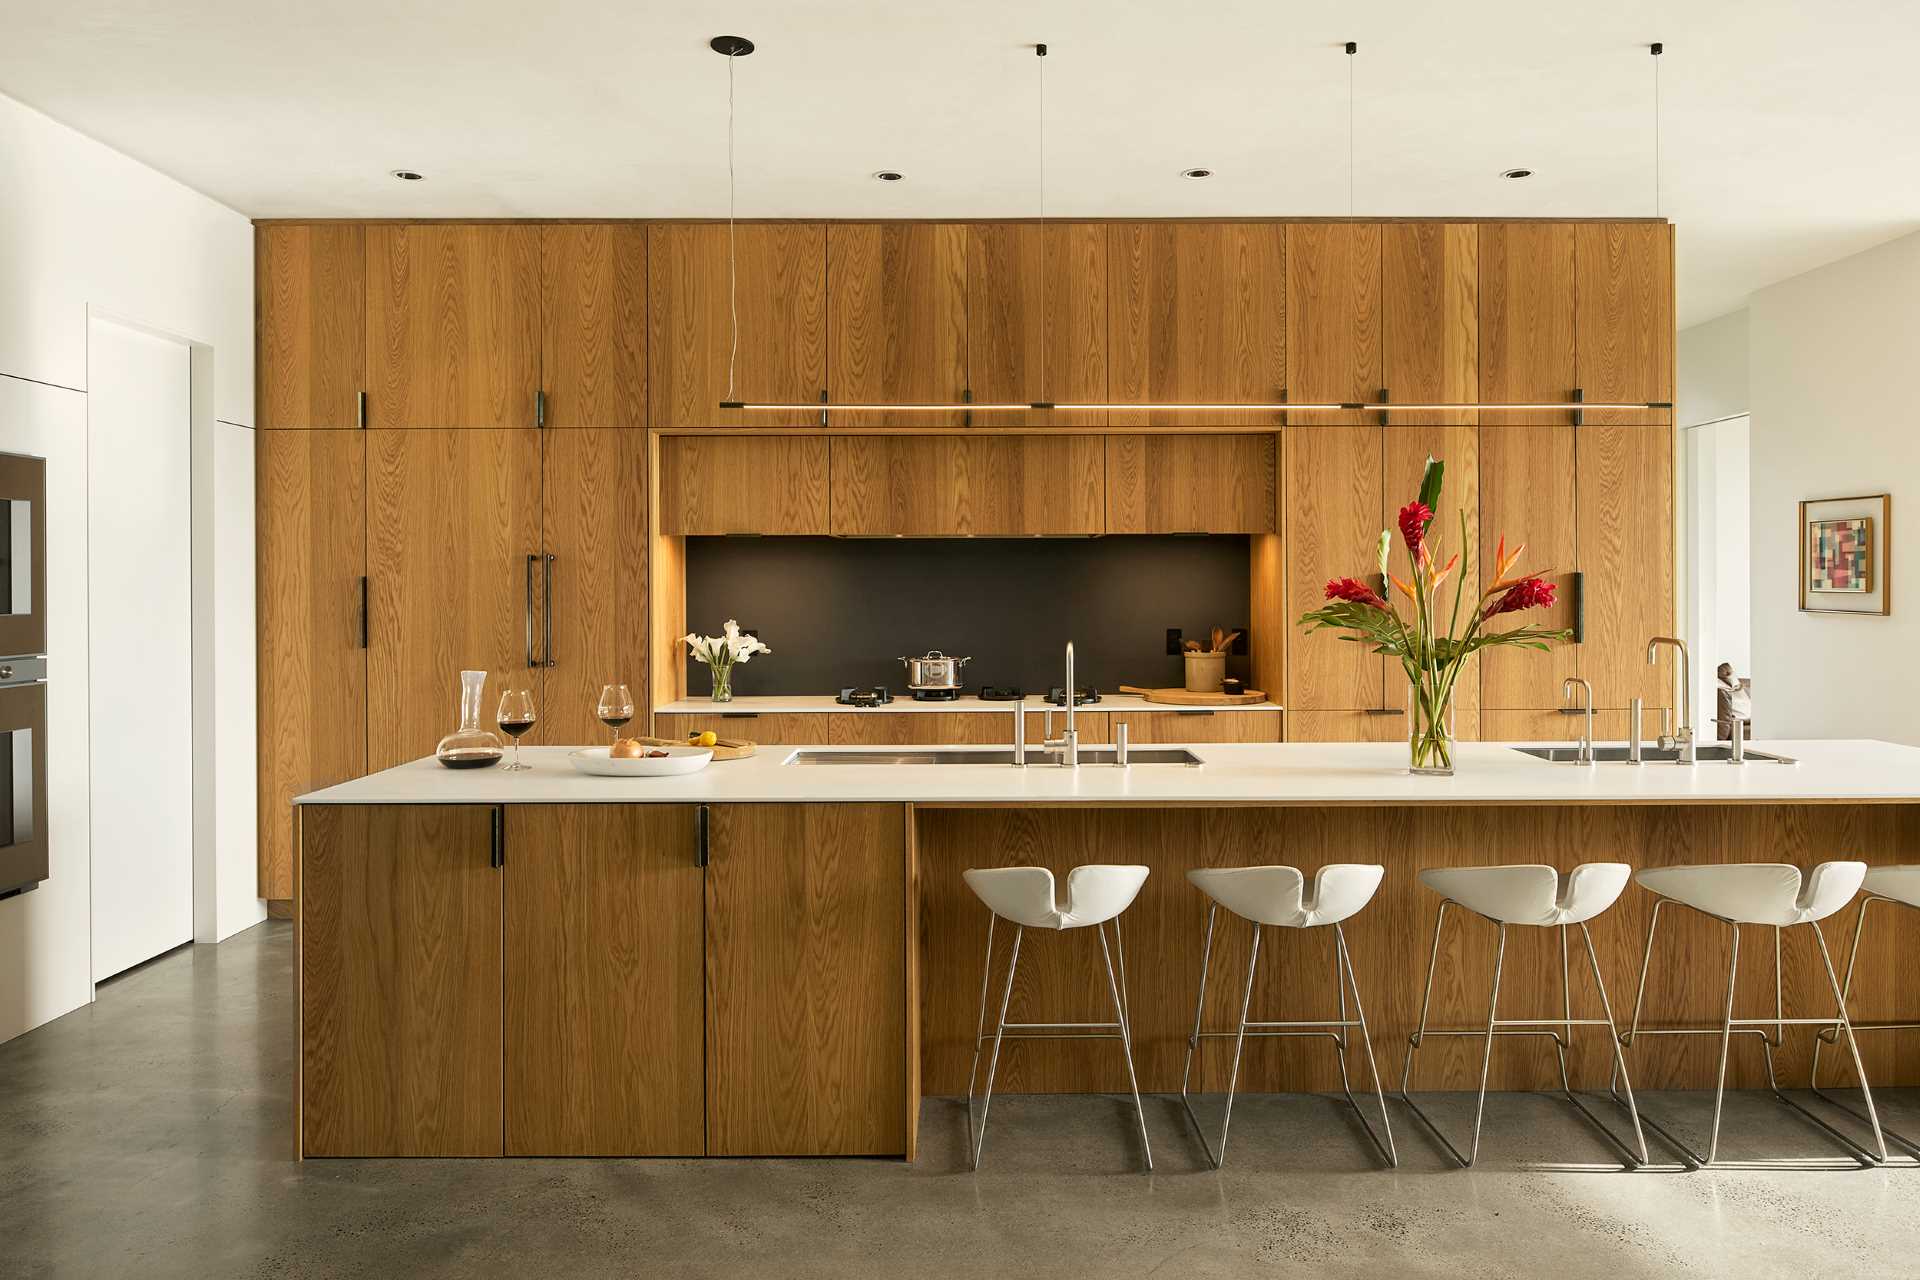 This modern kitchen features rift-sawn white oak cabinetry and Corian countertops.